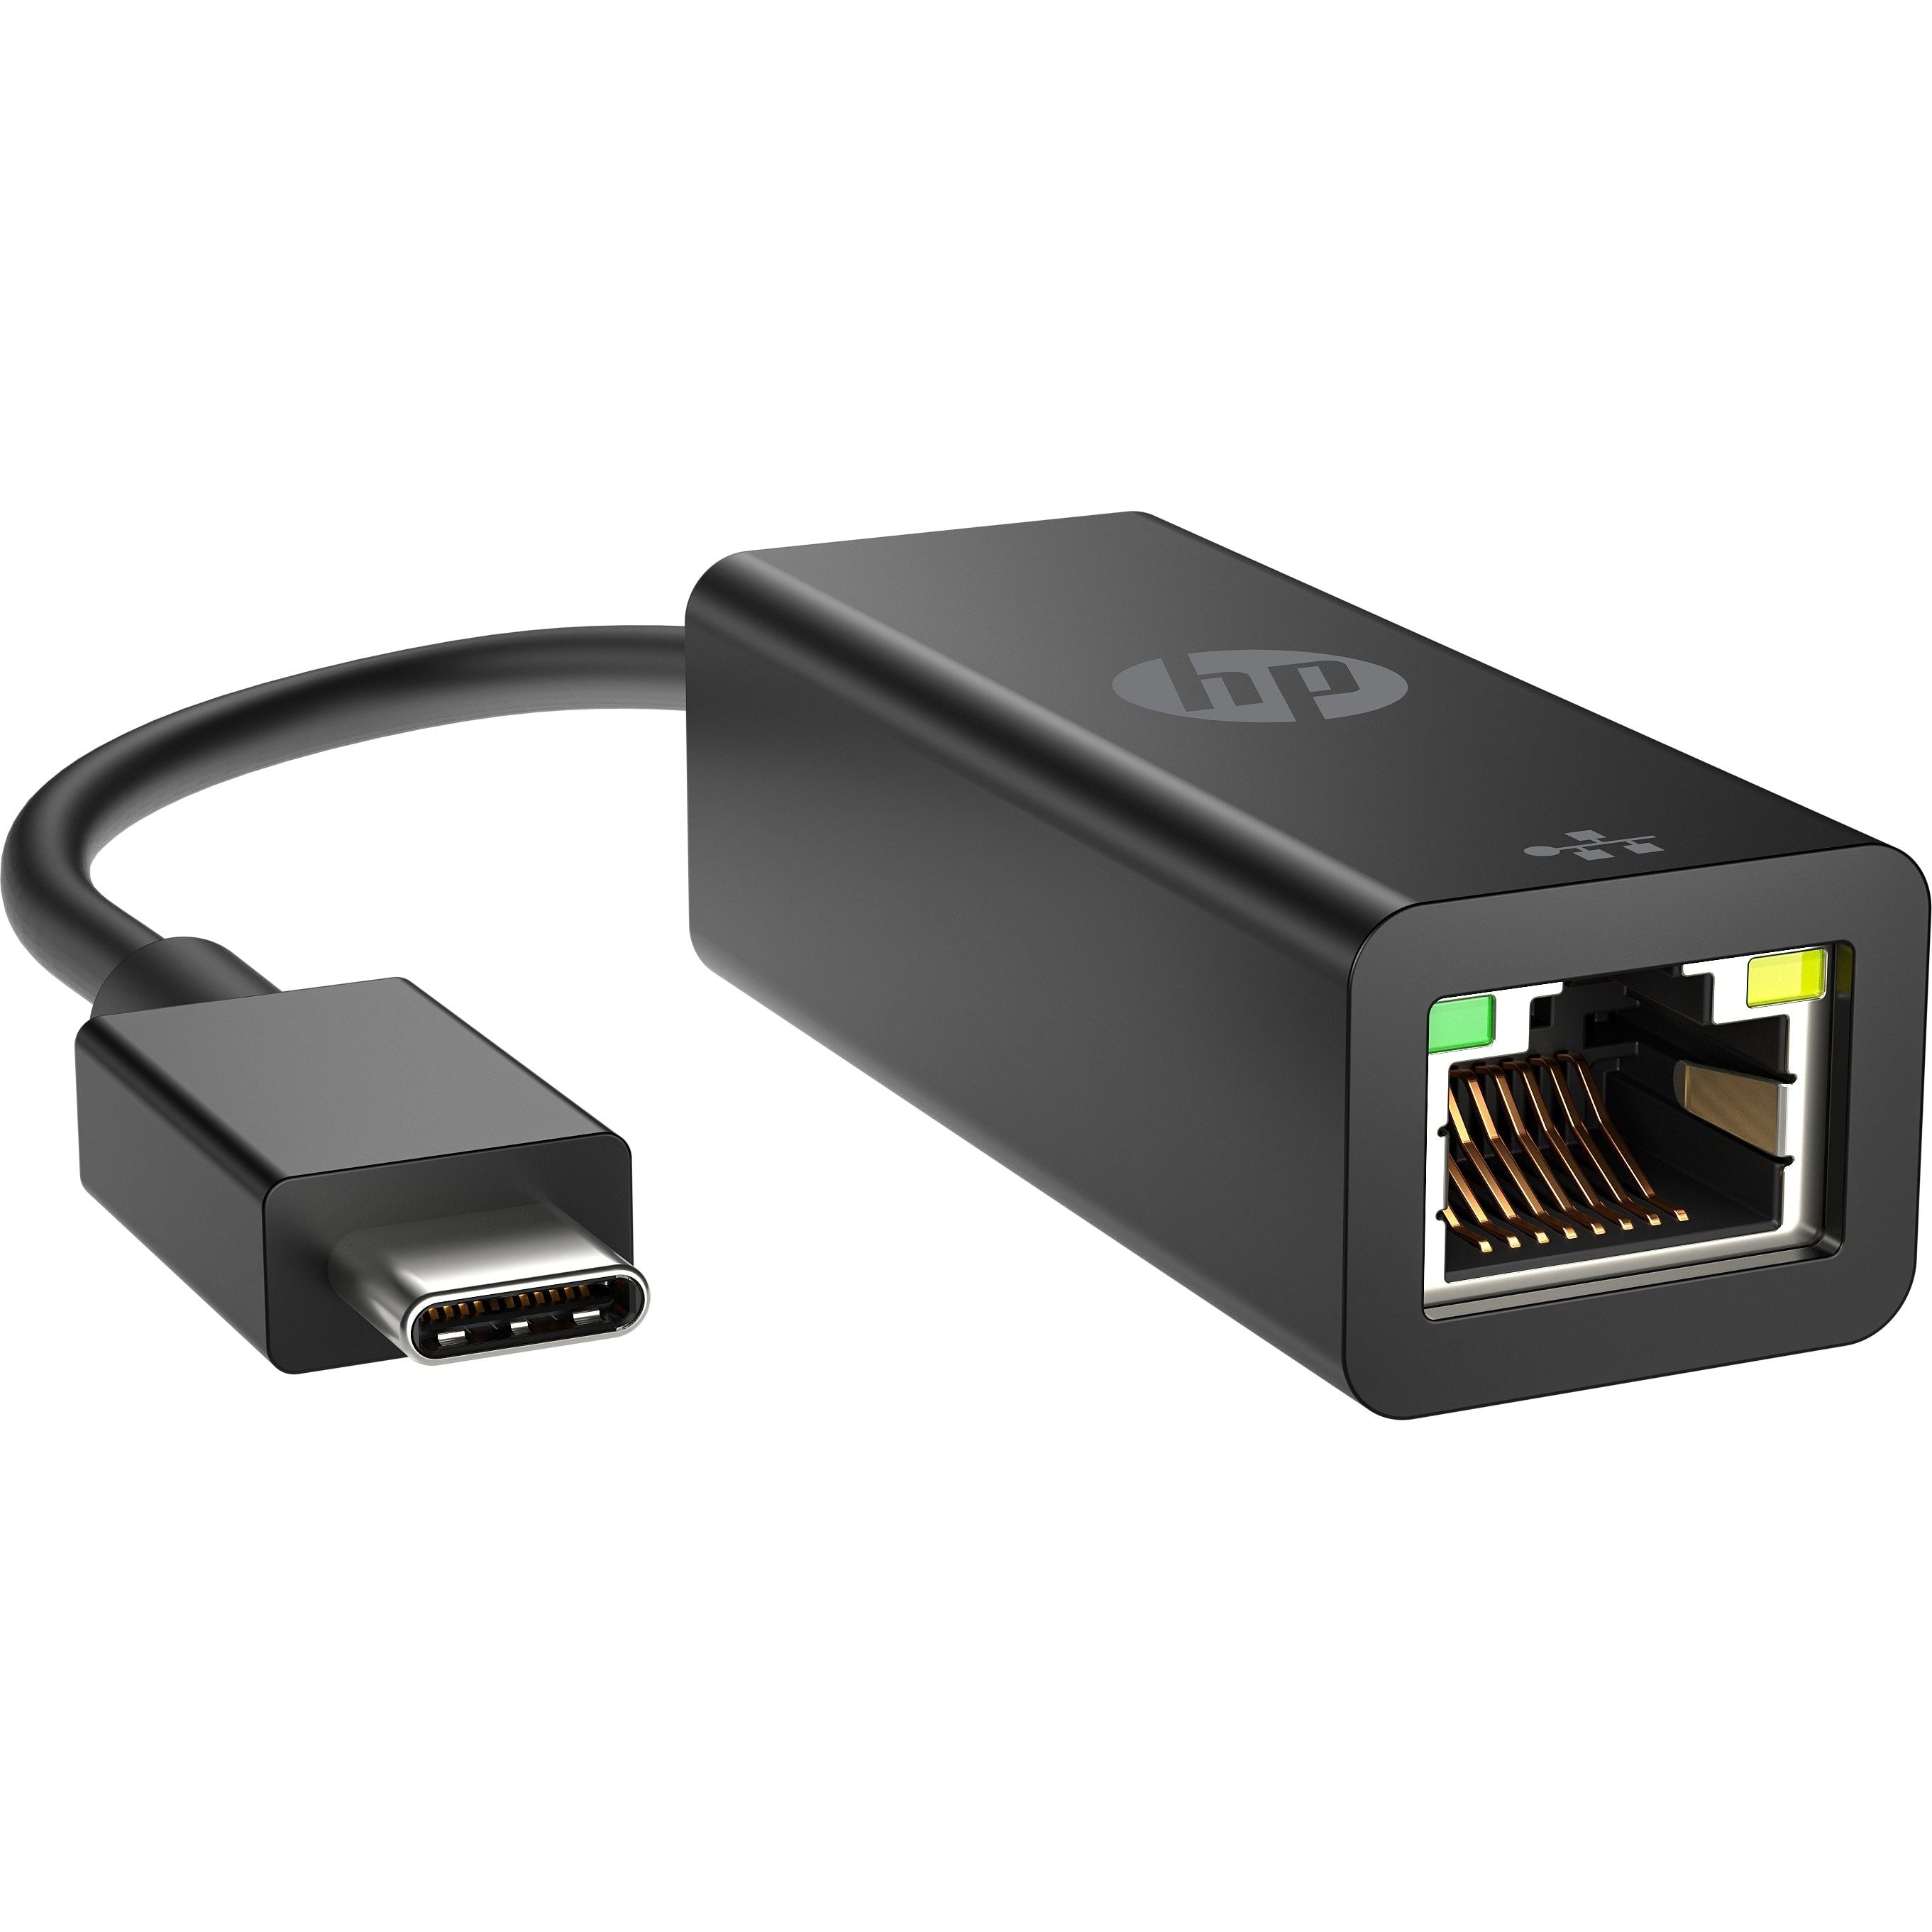 HP USB-C to RJ45 Adapter G2 interface cards/adapter RJ-45